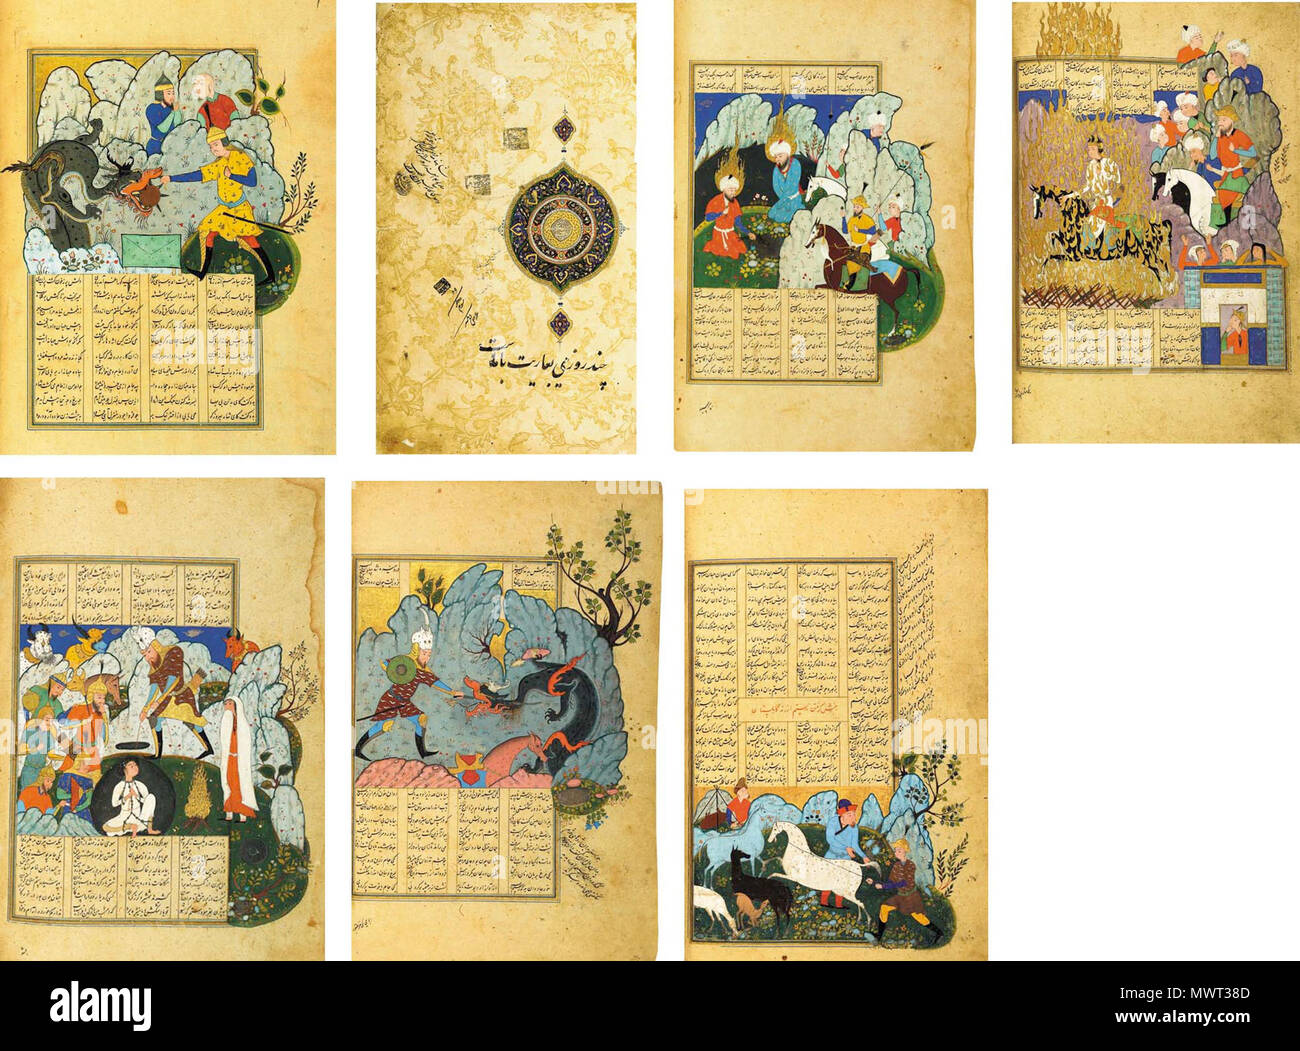 . English: An illustrated manuscript of the Shah Namah that may have belonged to Jahangir Source: http://www.christies.com/LotFinder/search/LotDetail.asp?sid=&intObjectID=3052252&SE=CMWCAT02+592+1839017235+&QR=M+1+261+Aqc0000900+569++Aqc0000900+&entry=india&SU=1&RQ=True&AN=262 (downloaded Oct. 2001) 'ABU'L QASIM FIRDAWSI (D. AH 416/1025 AD): SHAHNAMEH. Khorassan, circa 1570. Persian manuscript on light buff paper, 549ff. with 25ll. of black nasta'liq in four gold-outlined columns, titles in red, opening gold and polychrome illuminated bifolio, catch words in black, with seventy six miniatures  Stock Photo